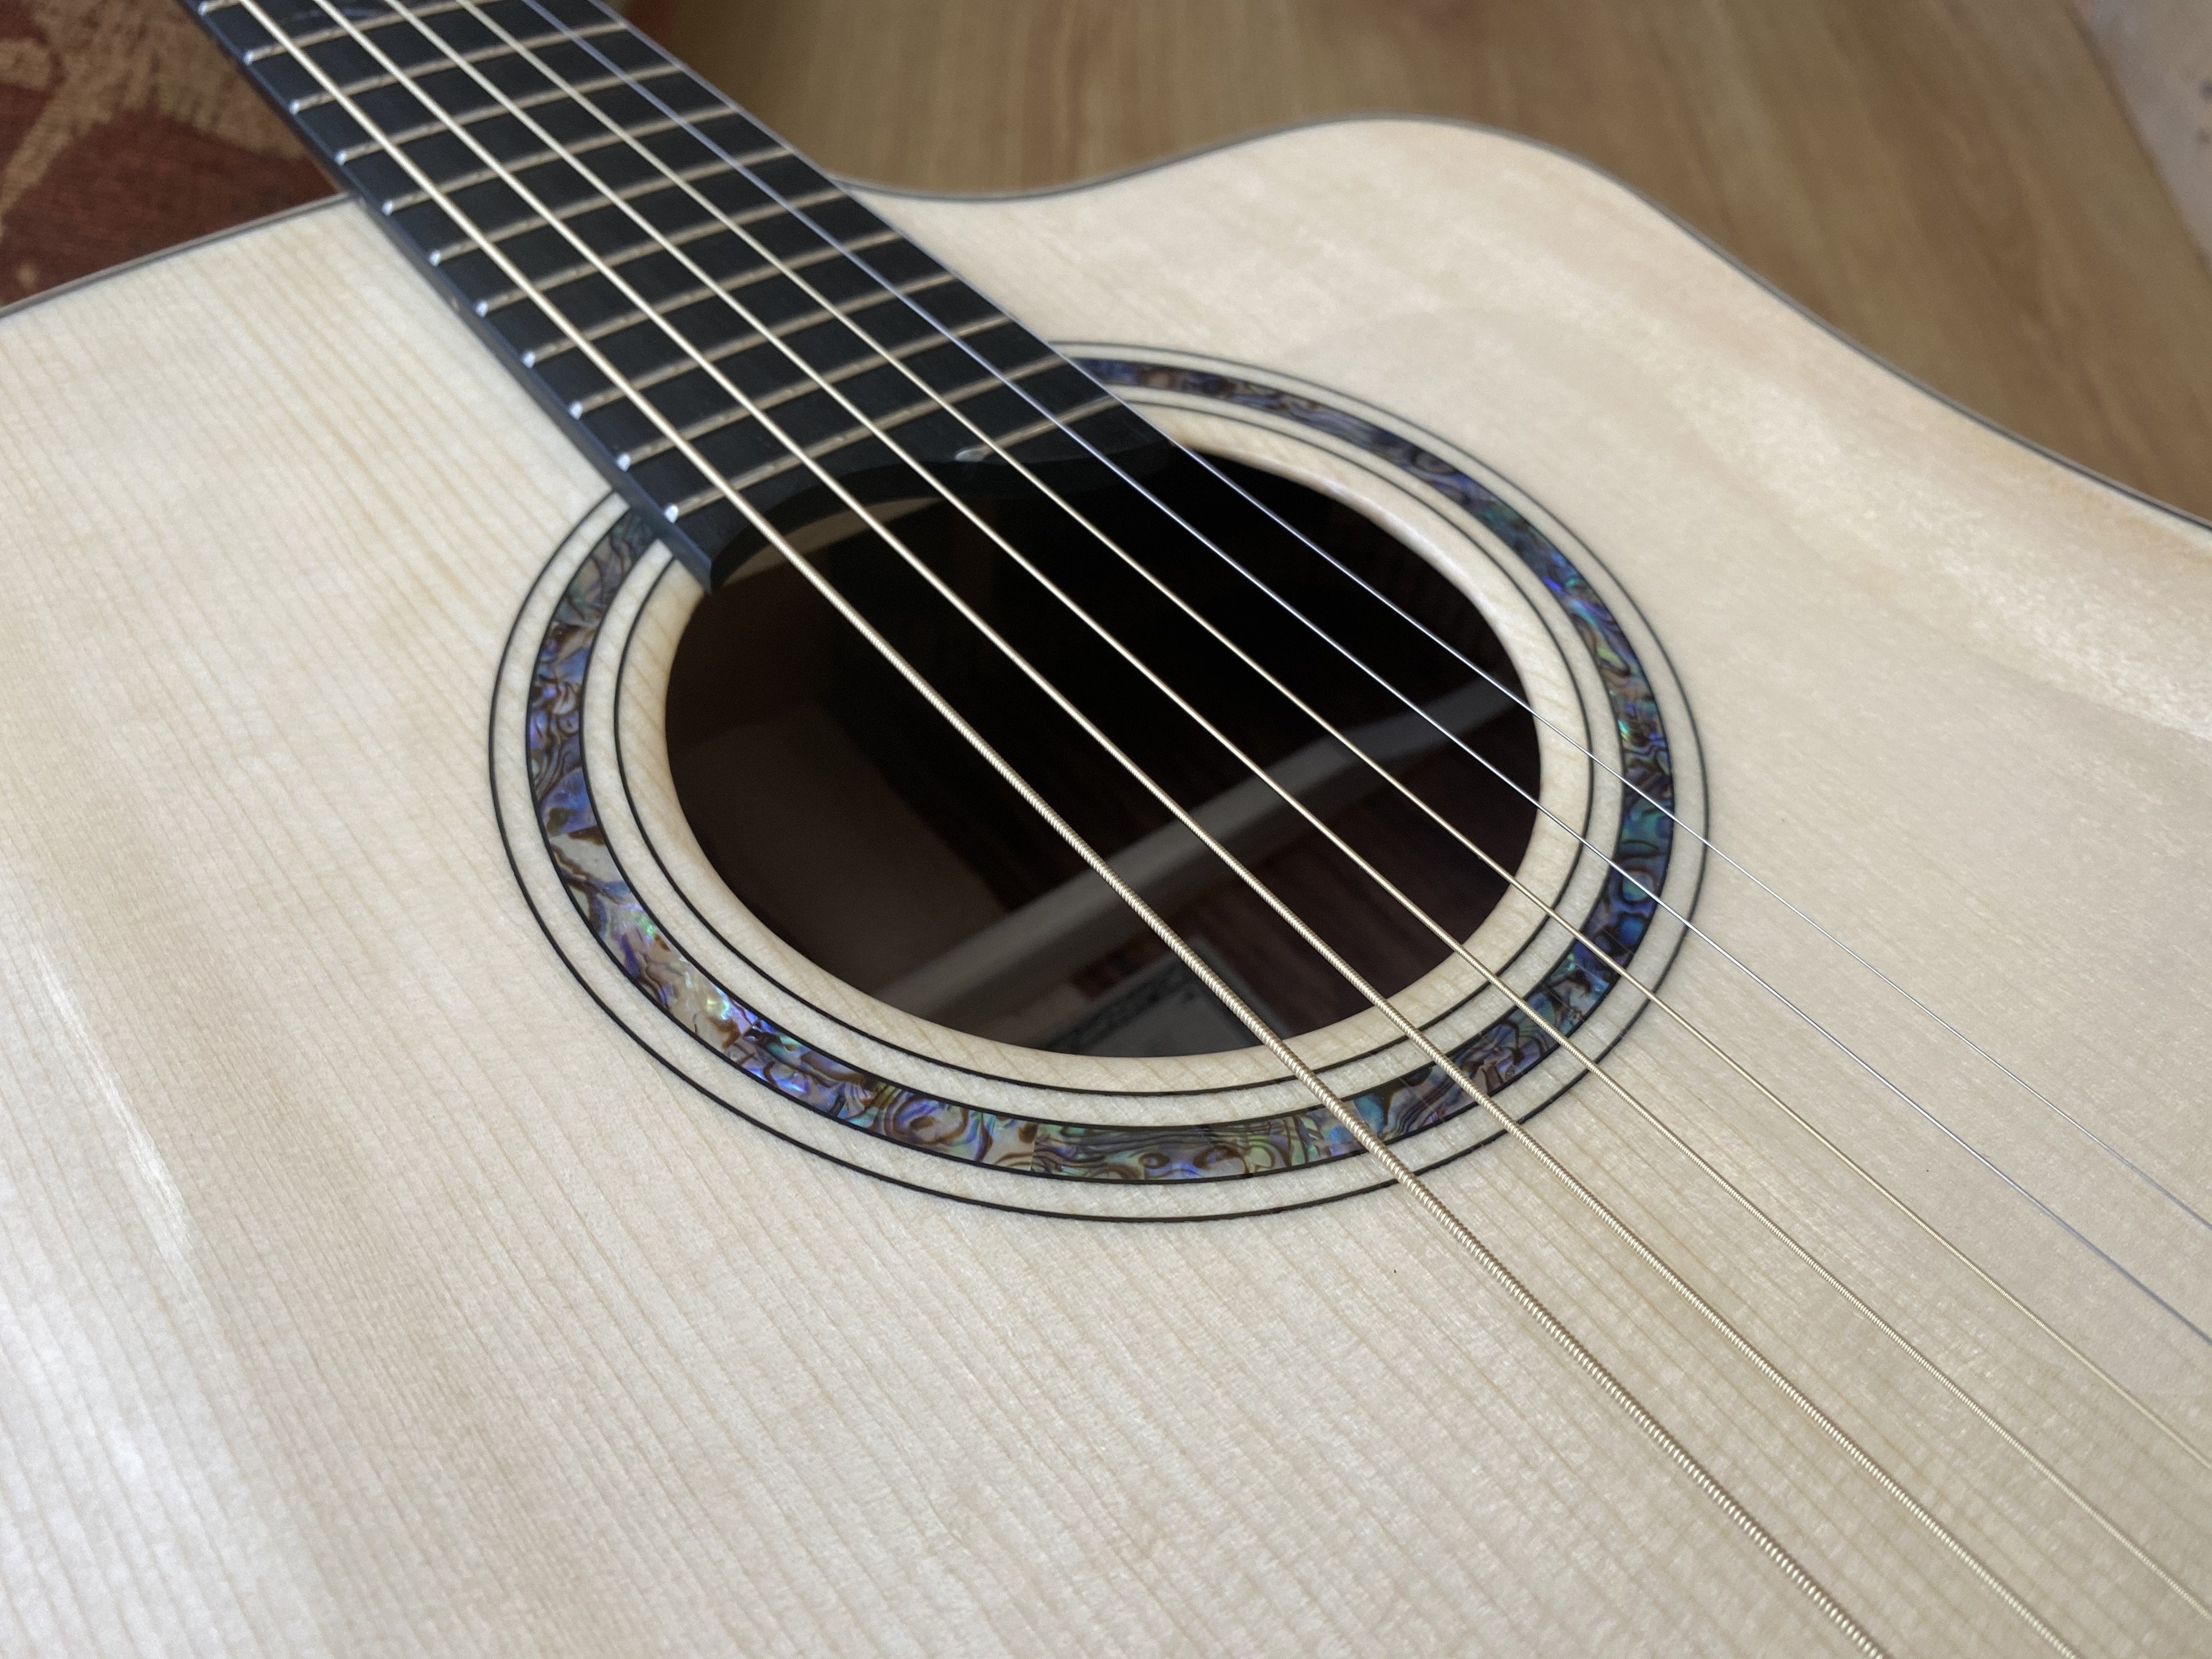 Dowina Granadillo DC DS Dolomite Spruce, Acoustic Guitar for sale at Richards Guitars.